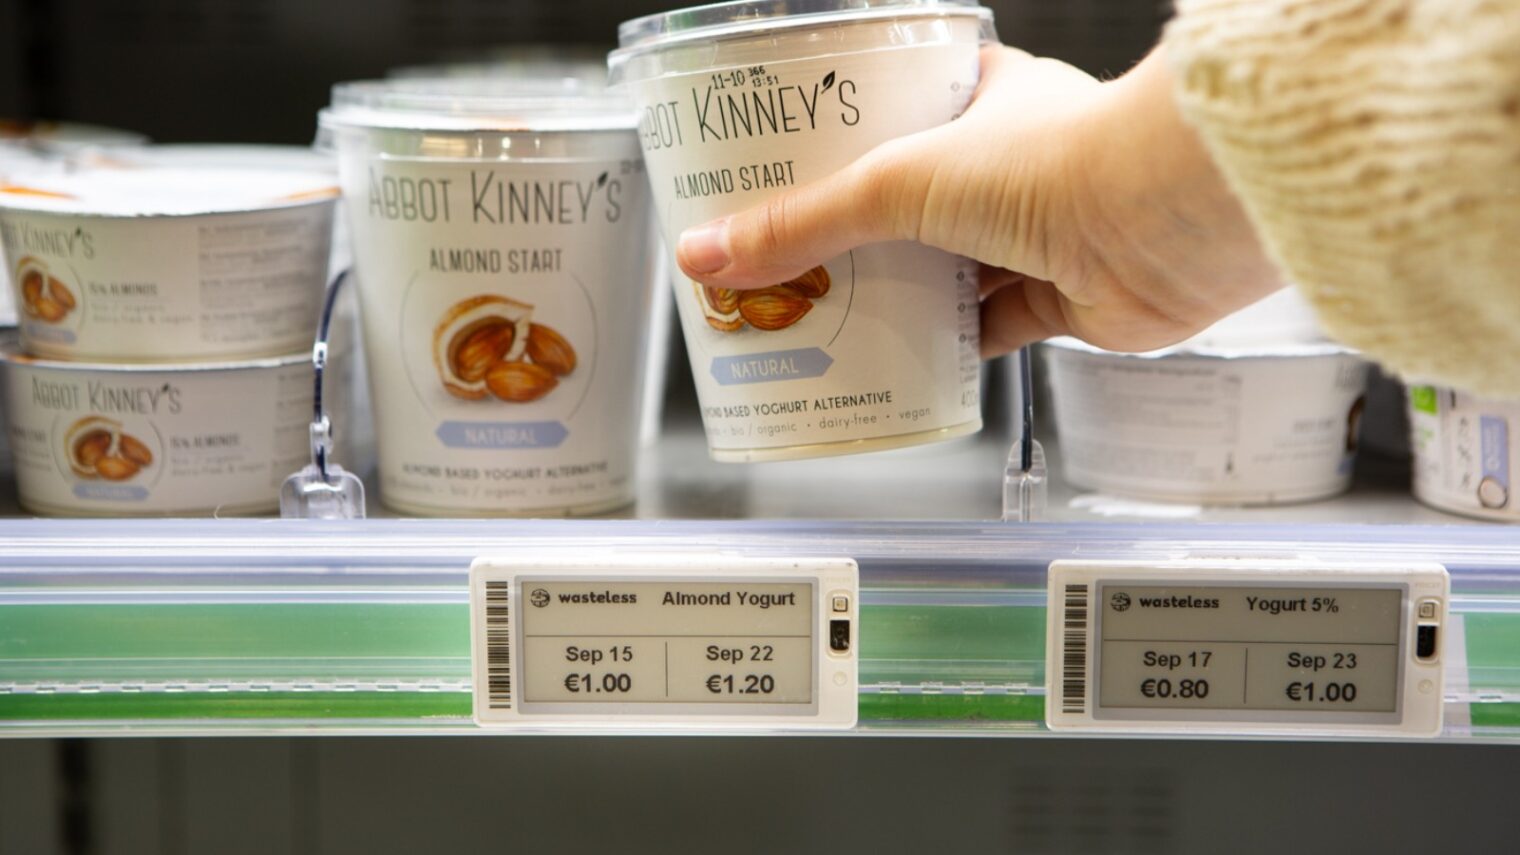 Dynamic pricing based on expiration date reduces food waste. Photo courtesy of Wasteless